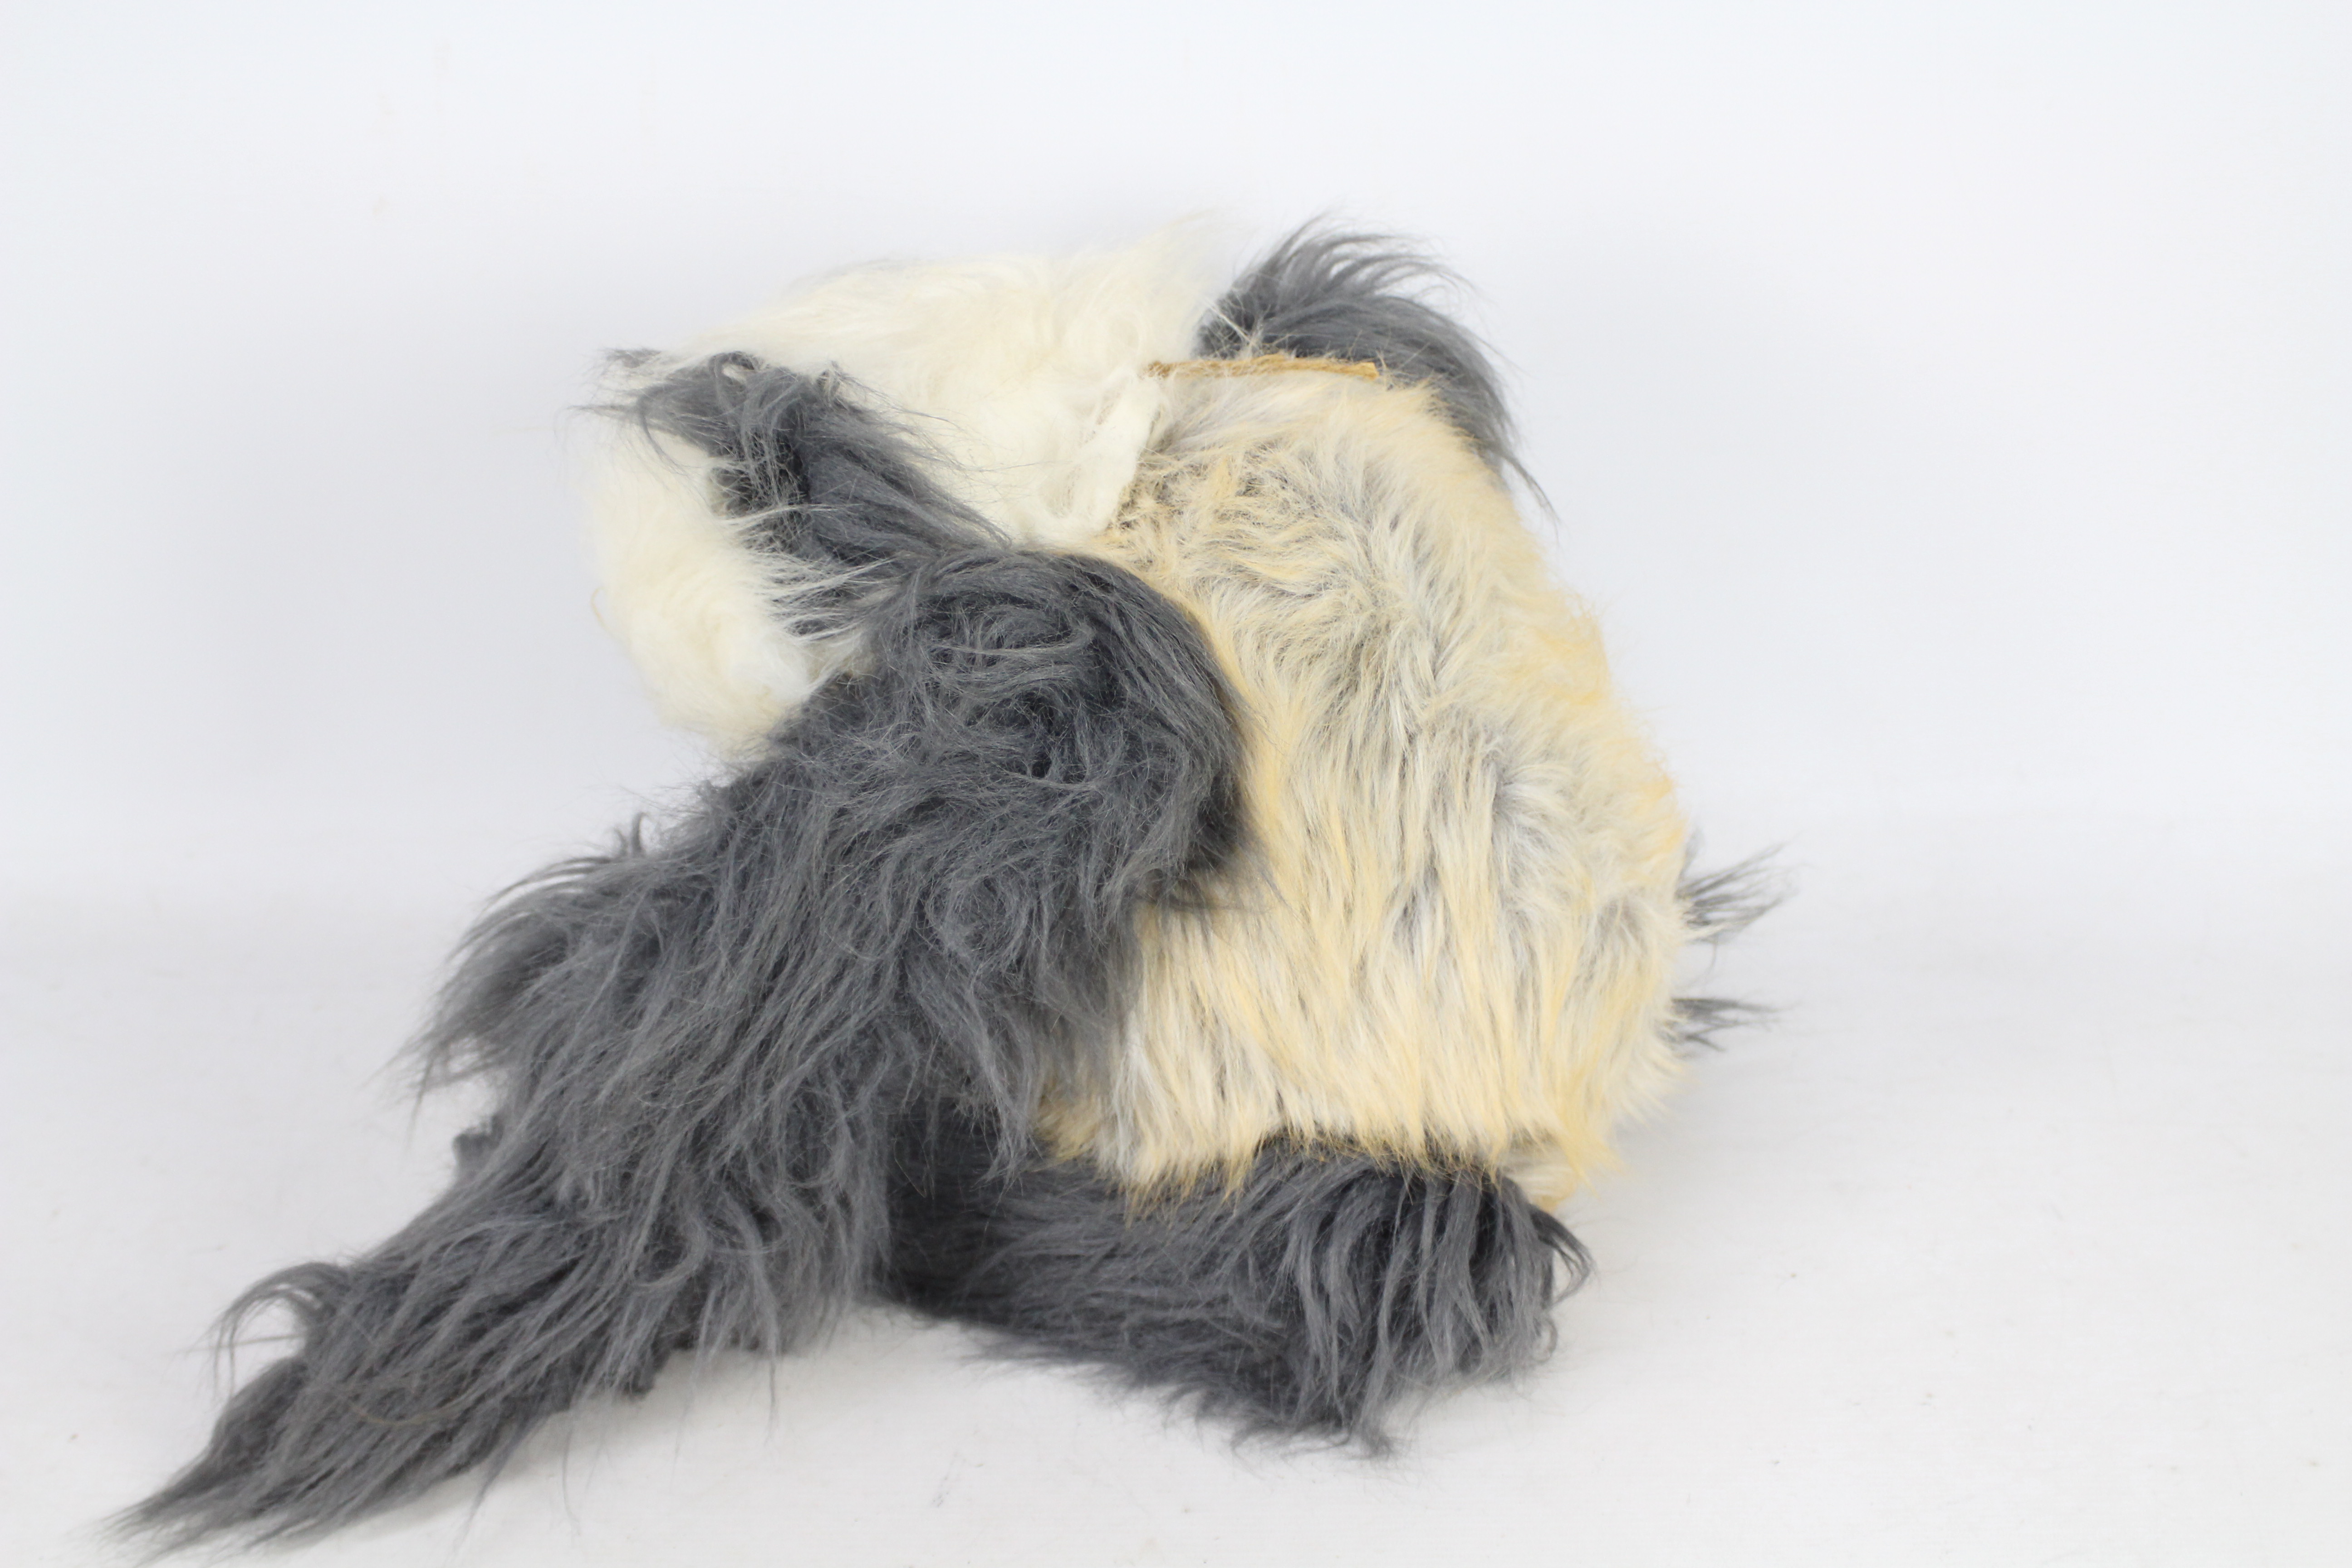 Jo Bears - A hand-made faux fur bear by Jo Nevill - The bear's name is 'Kasius' and has glass eyes, - Image 6 of 6